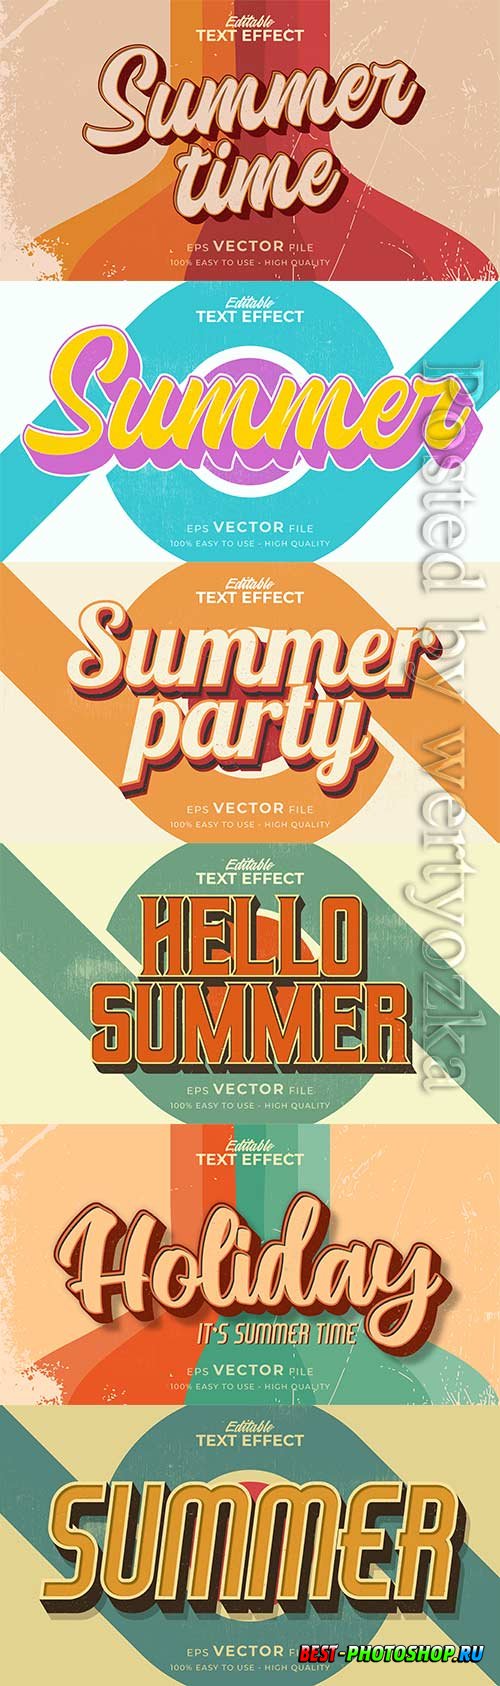 Retro summer holiday text in grunge style theme in vector vol 7